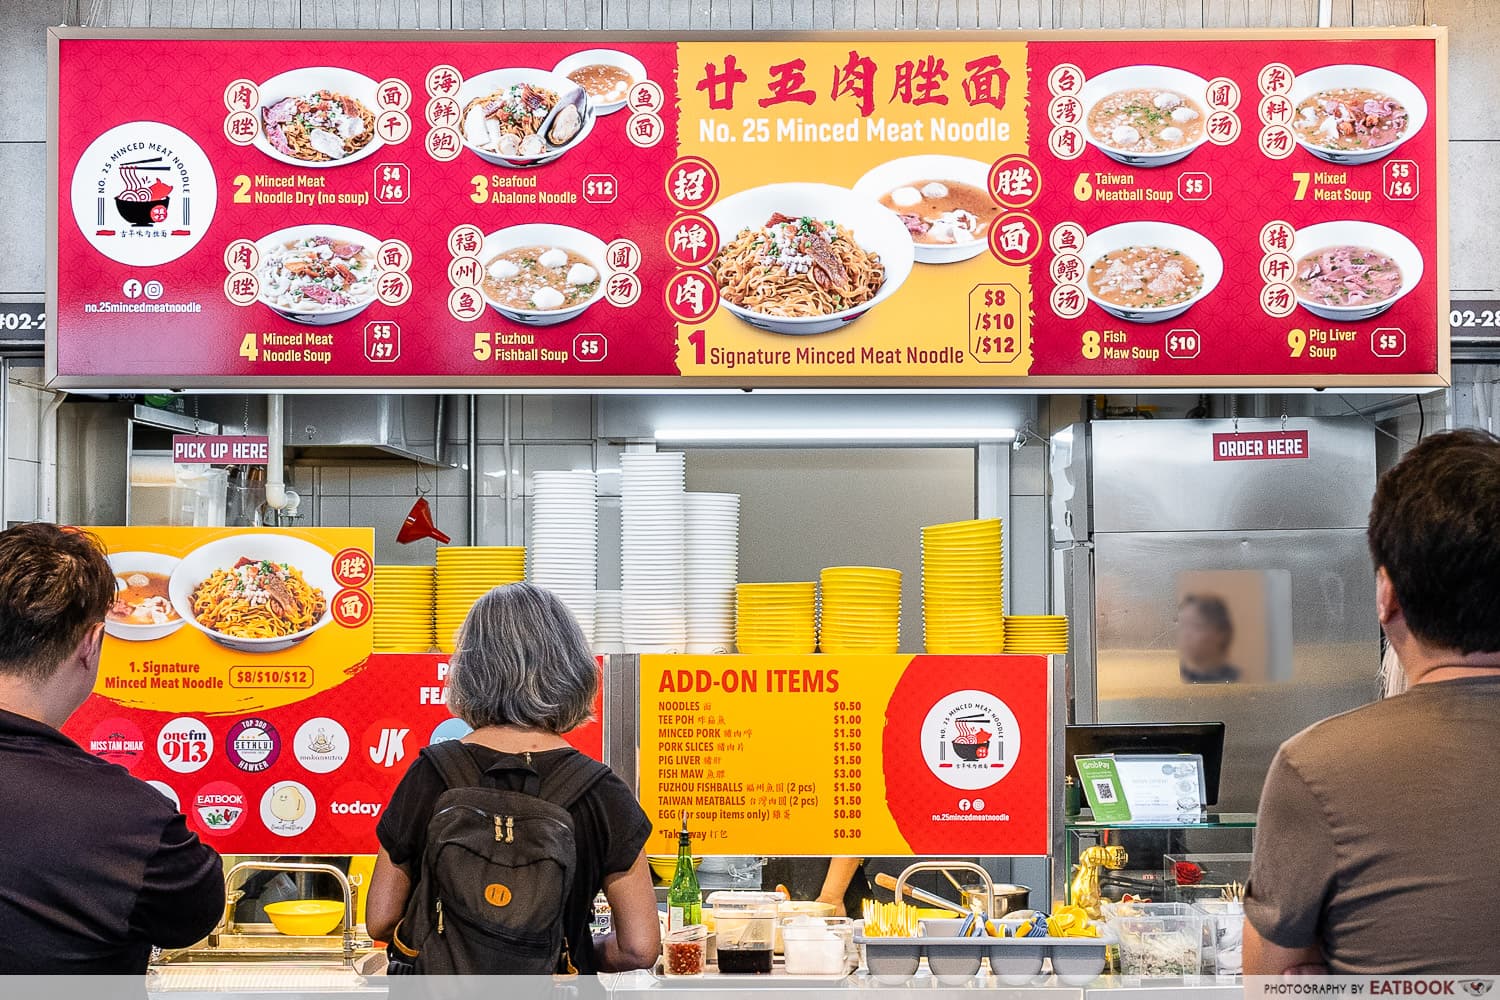 one punggol hawker centre - no 25 minced meat noodle storefront